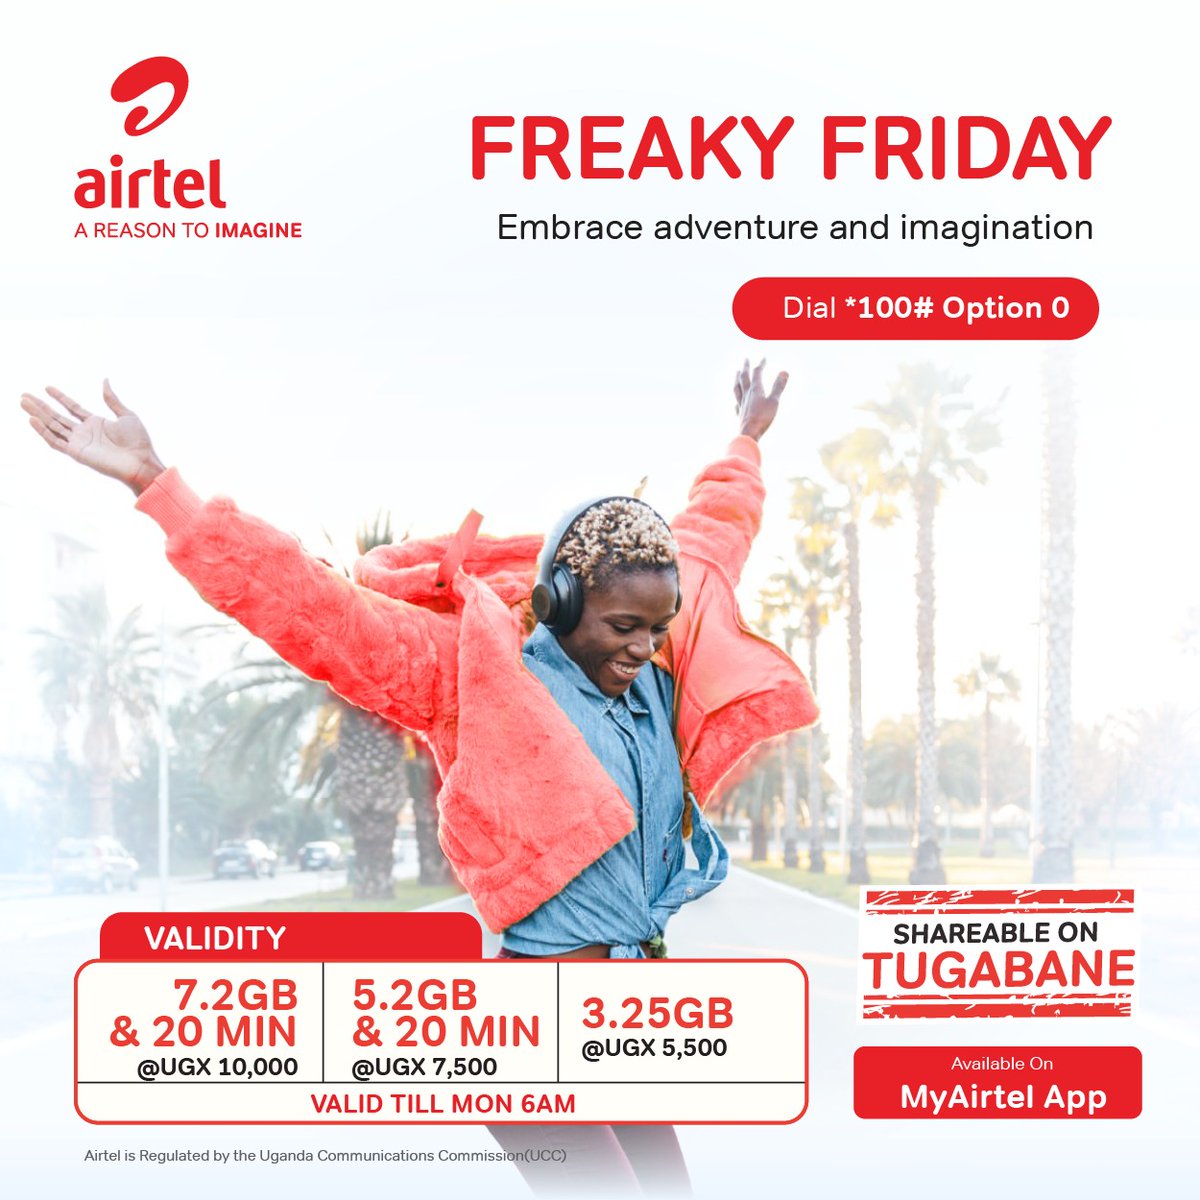 Friday’s always got better with amazing #FreakyFriday Bundles. Simply dial *100*0# or use MyAirtel app airtelafrica.onelink.me/cGyr/qgj4qeu2 to select your favorite bundle.